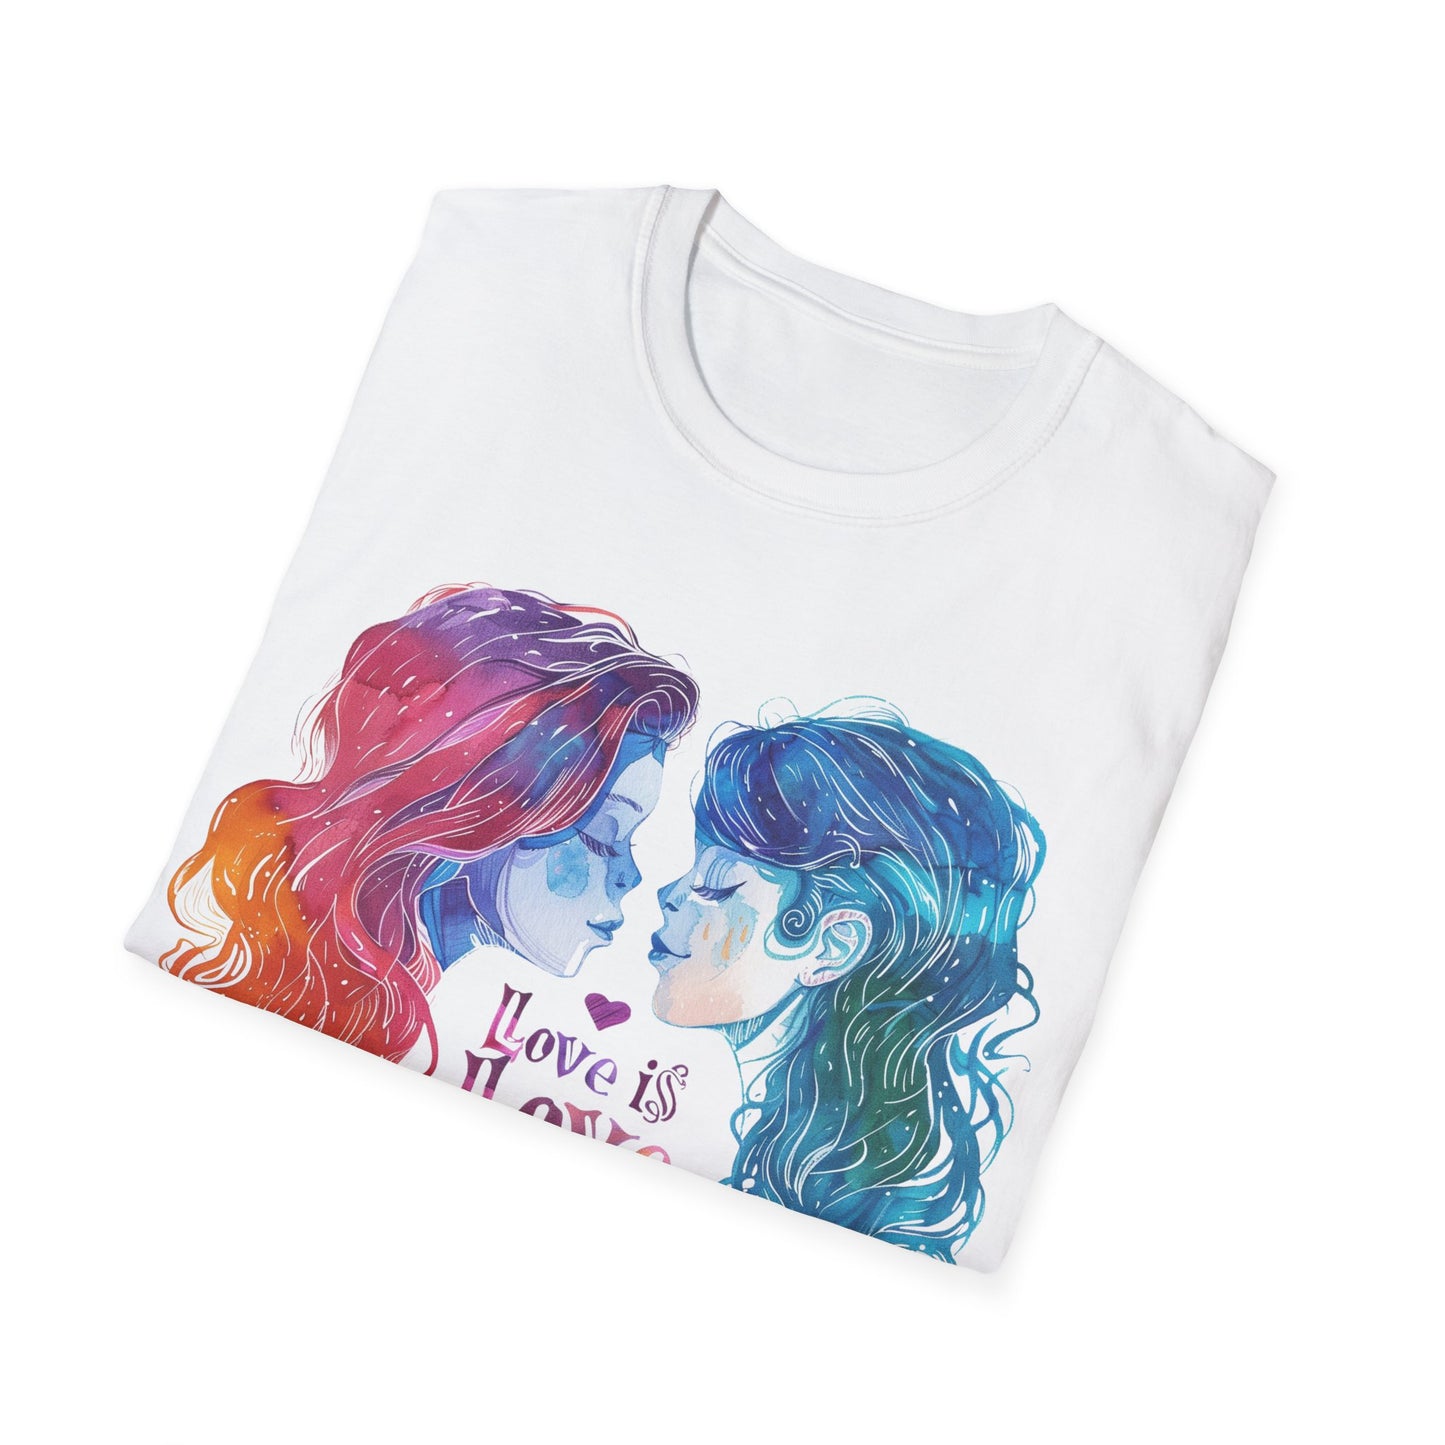 Love is Love T-Shirt | Show Your Pride Shirt!